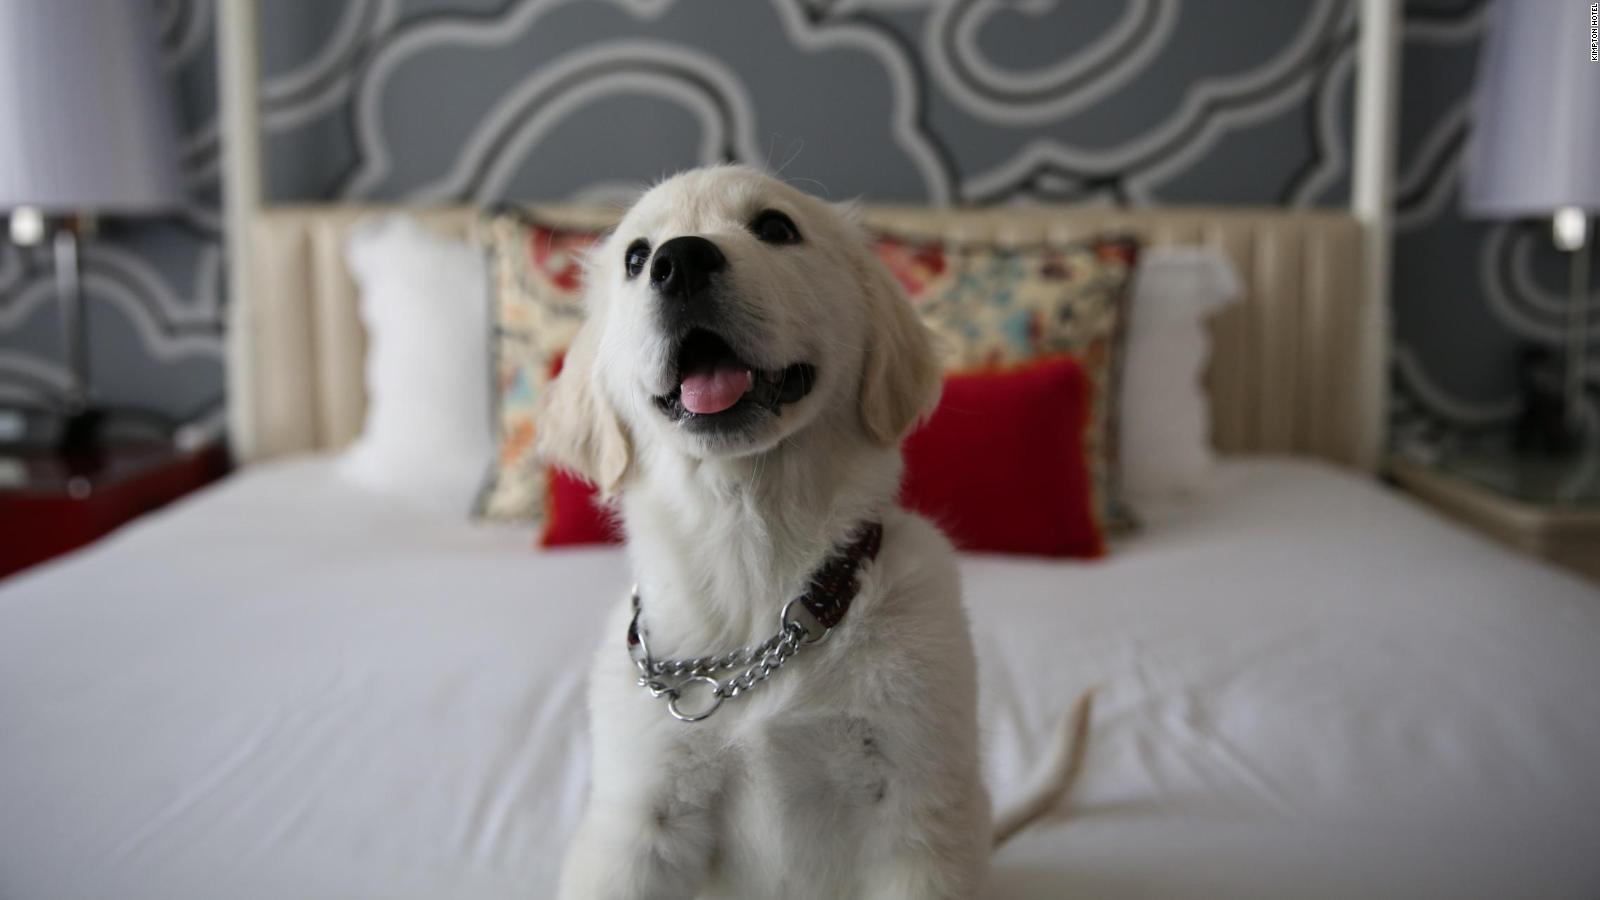 Pet-friendly Hotel Singapore: Everything You Want to Know About It